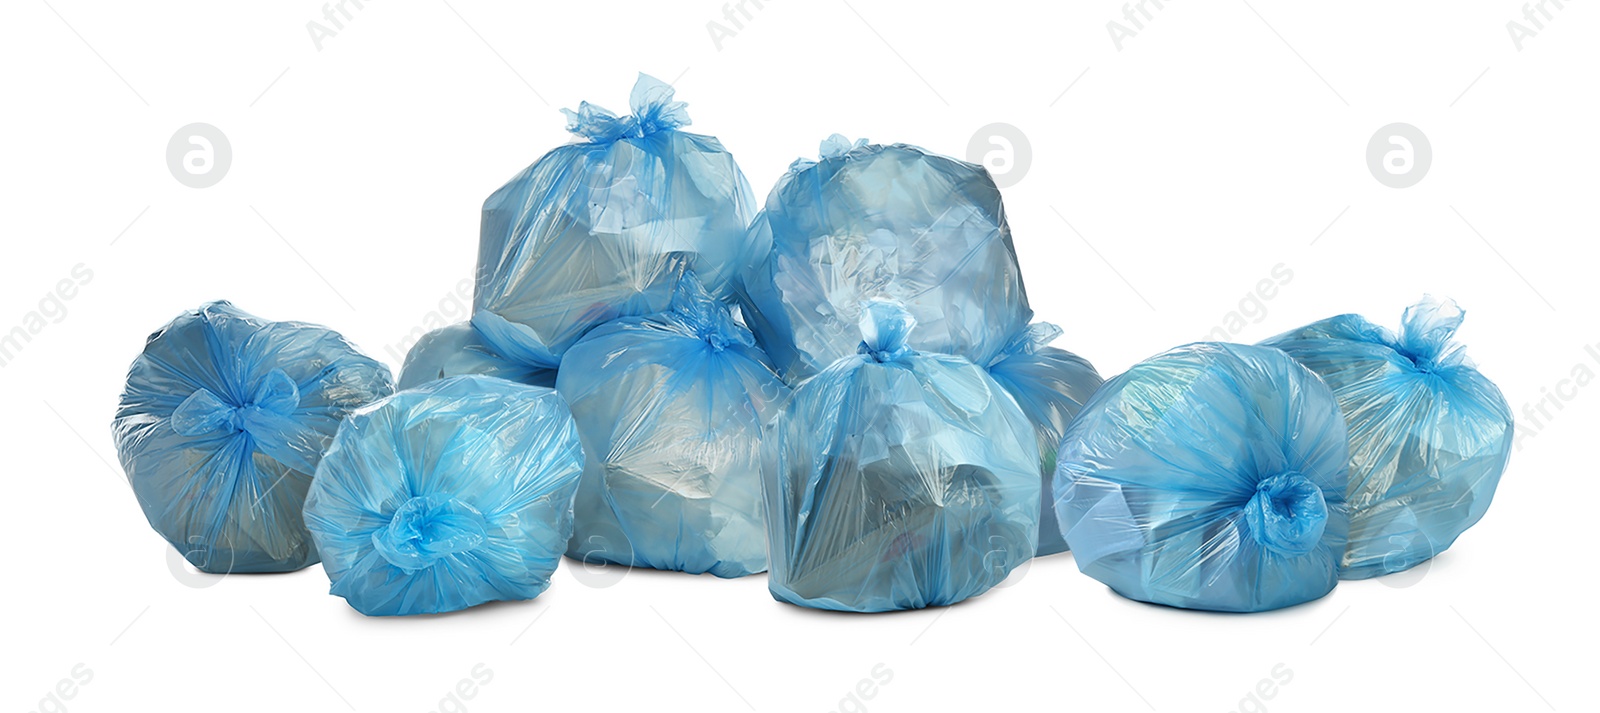 Image of Many trash bags filled with garbage on white background. Banner design